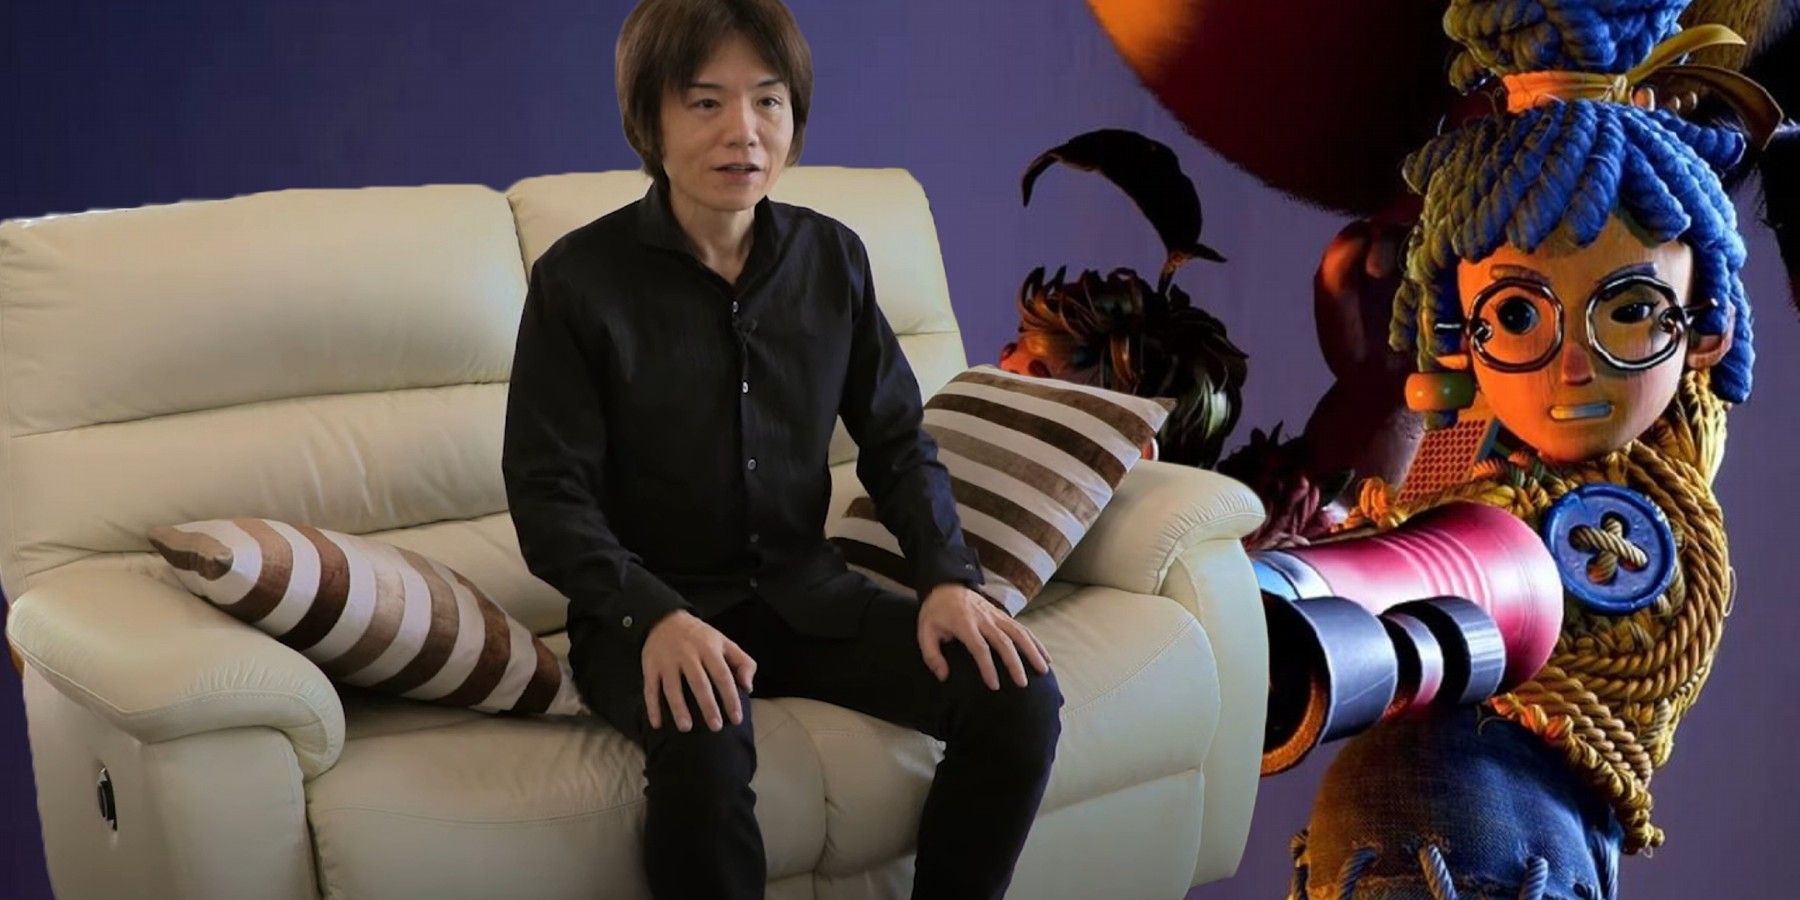 Masahiro Sakurai Quips About Playing It Takes Two by Himself - IGN